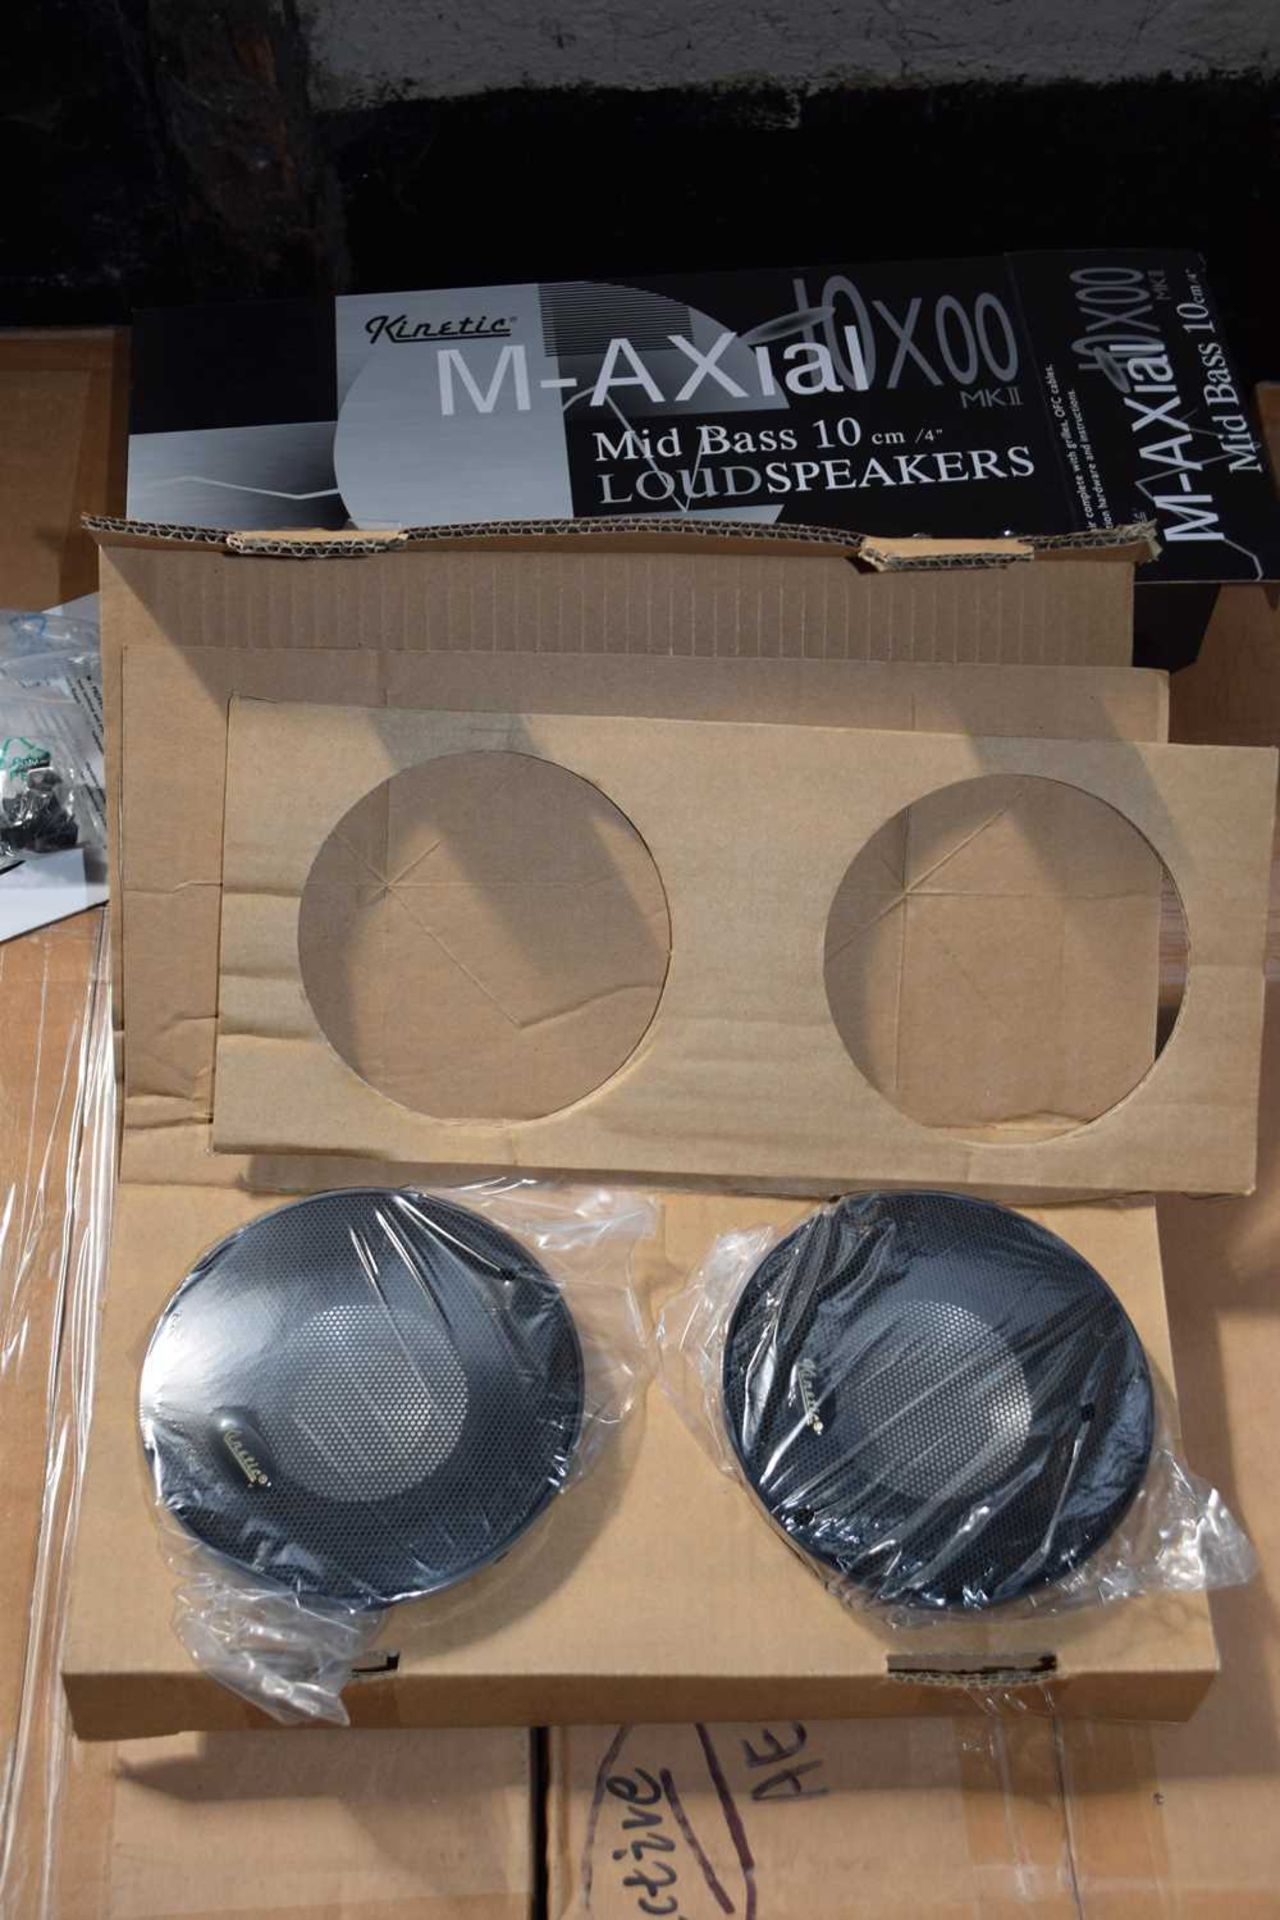 Box of 6 pairs of Kinetic M/AXIAL Mid bass 10cm loud speakers 10X00MK2 - Image 6 of 7